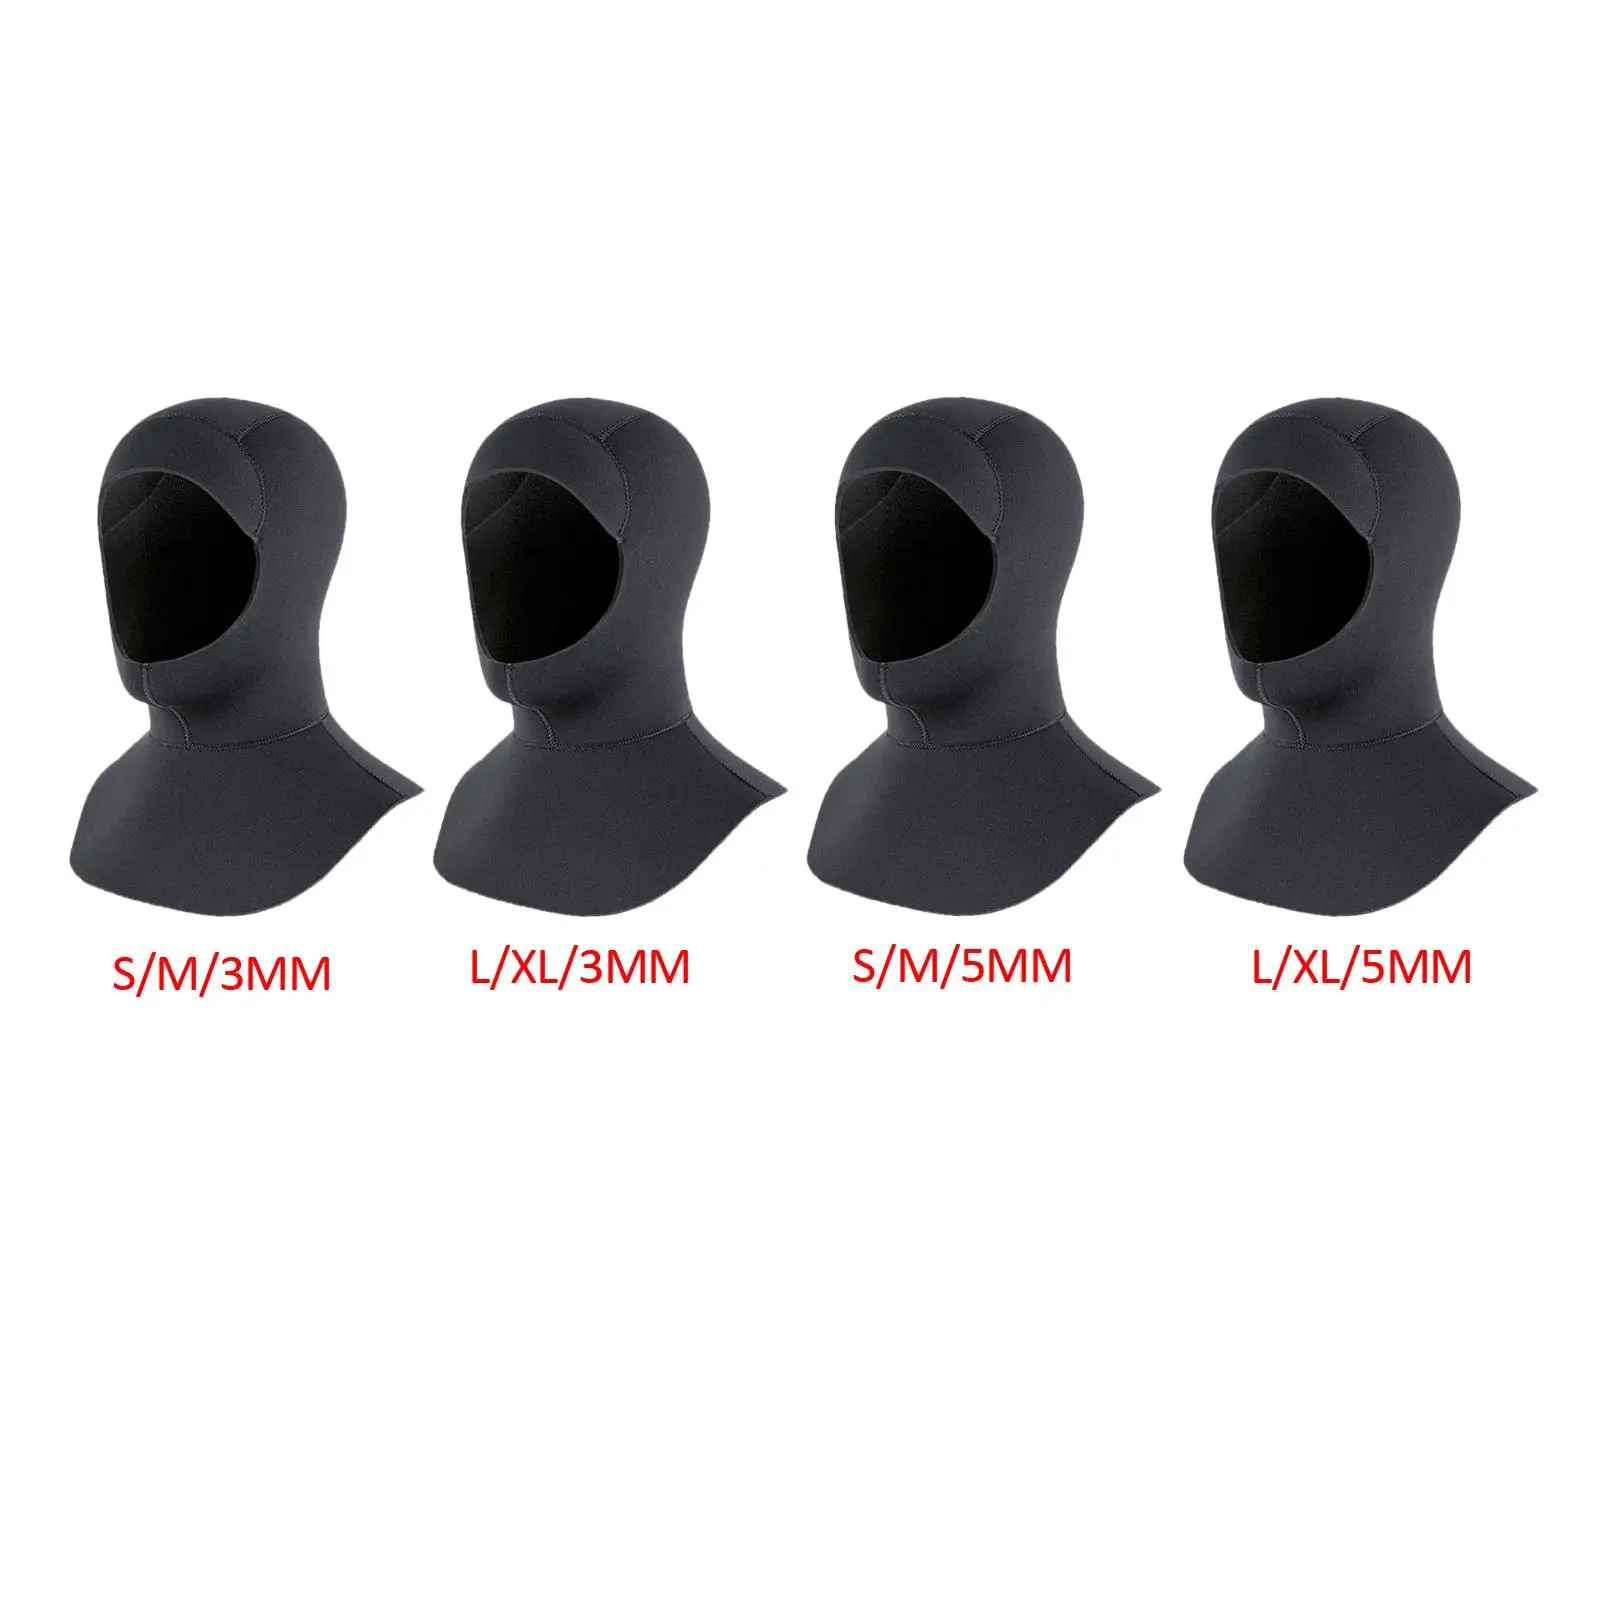 Wetsuit Dive Hood Surfing Thermal Hood Elastic Dive Gear Head Cover for Underwater Spearfishing Sailing Water Sports Unisex